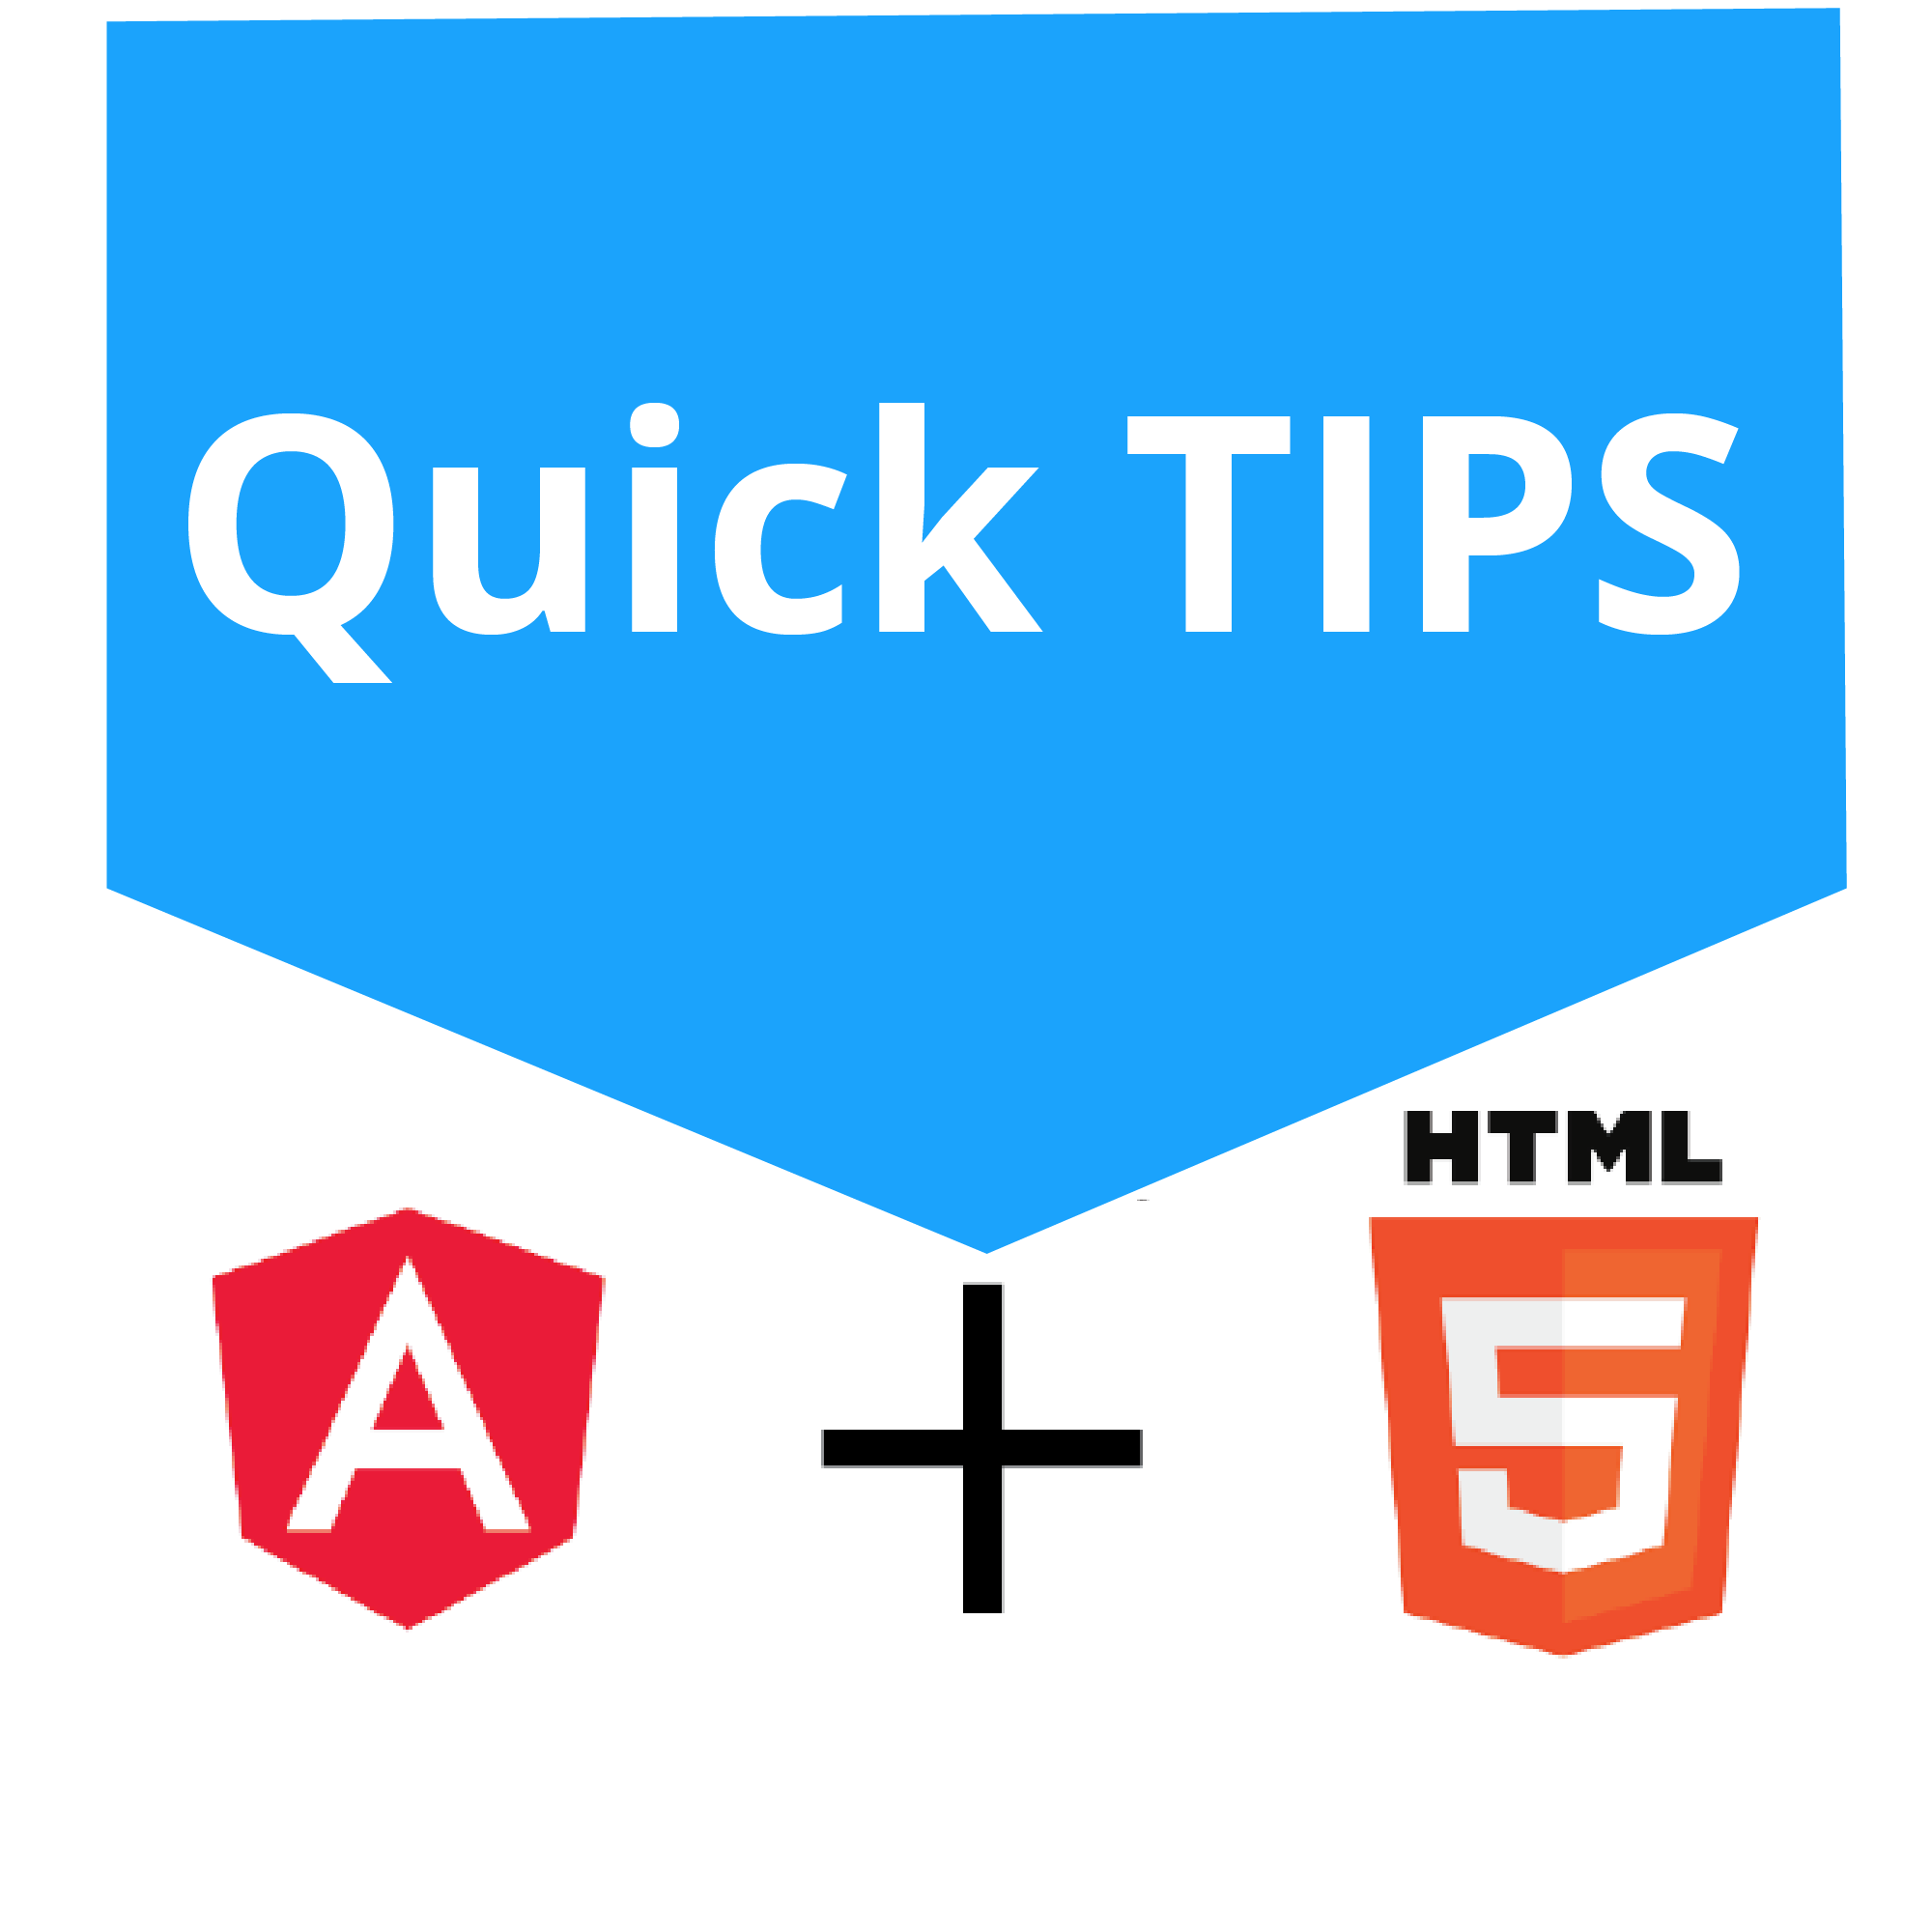 A quintessential HTML trick for Angularjs - Resizing your iframe